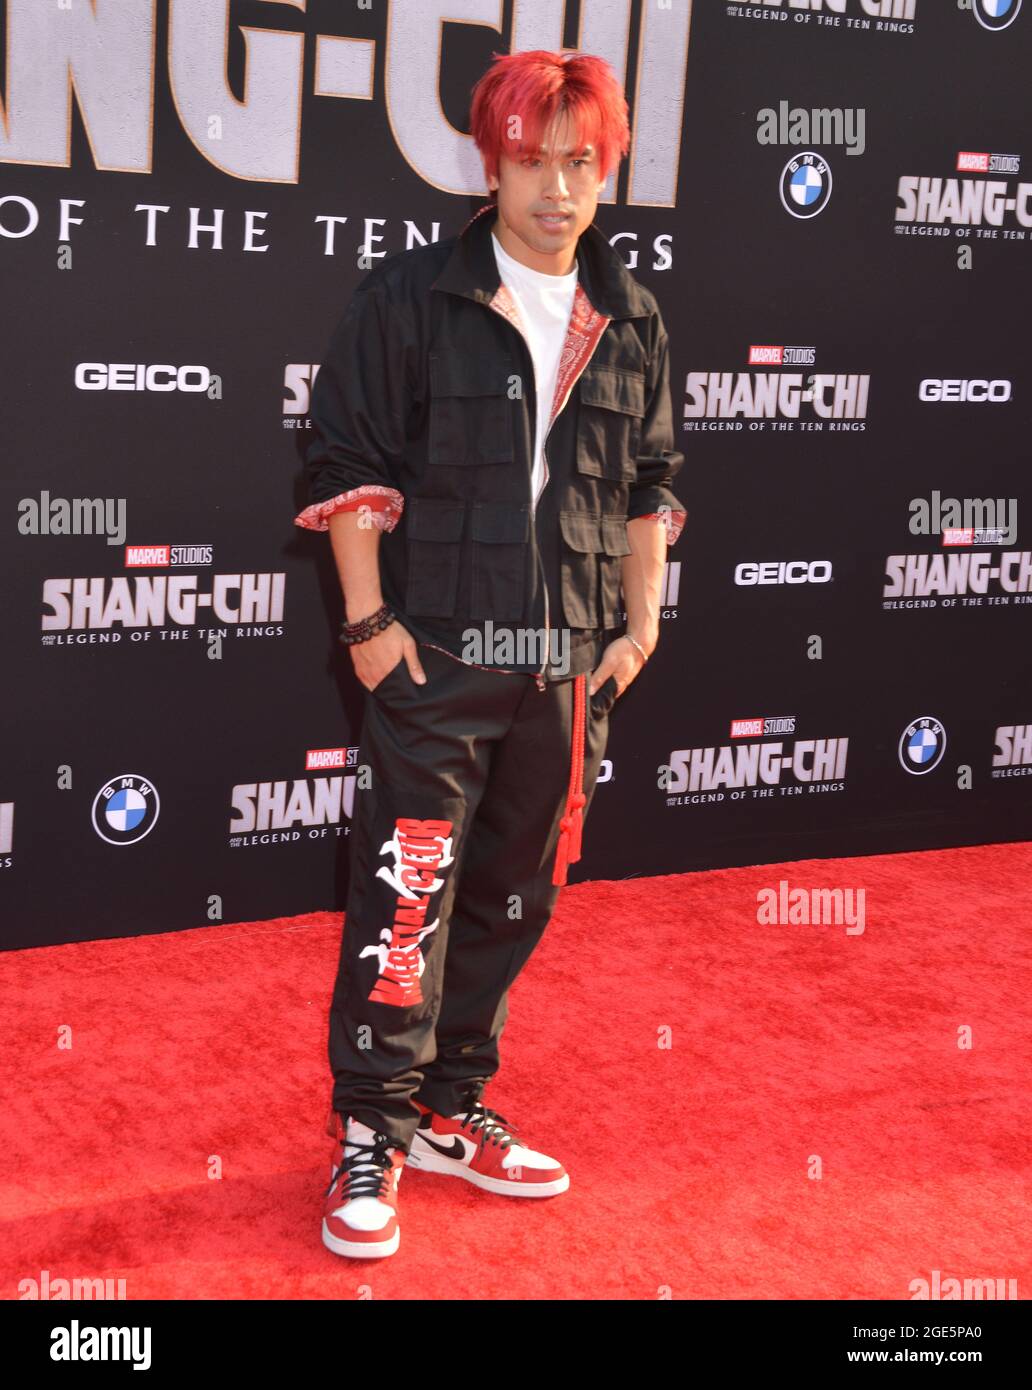 Los Angeles, USA. 17th Aug, 2021. Andy Le attends the Disney Marvel Premiere of Shang-Chi and the Legend of the Ten Rings at the El Capitan Theatre in Los Angeles. August 16, 2021. Credit: Tsuni/USA/Alamy Live News Stock Photo